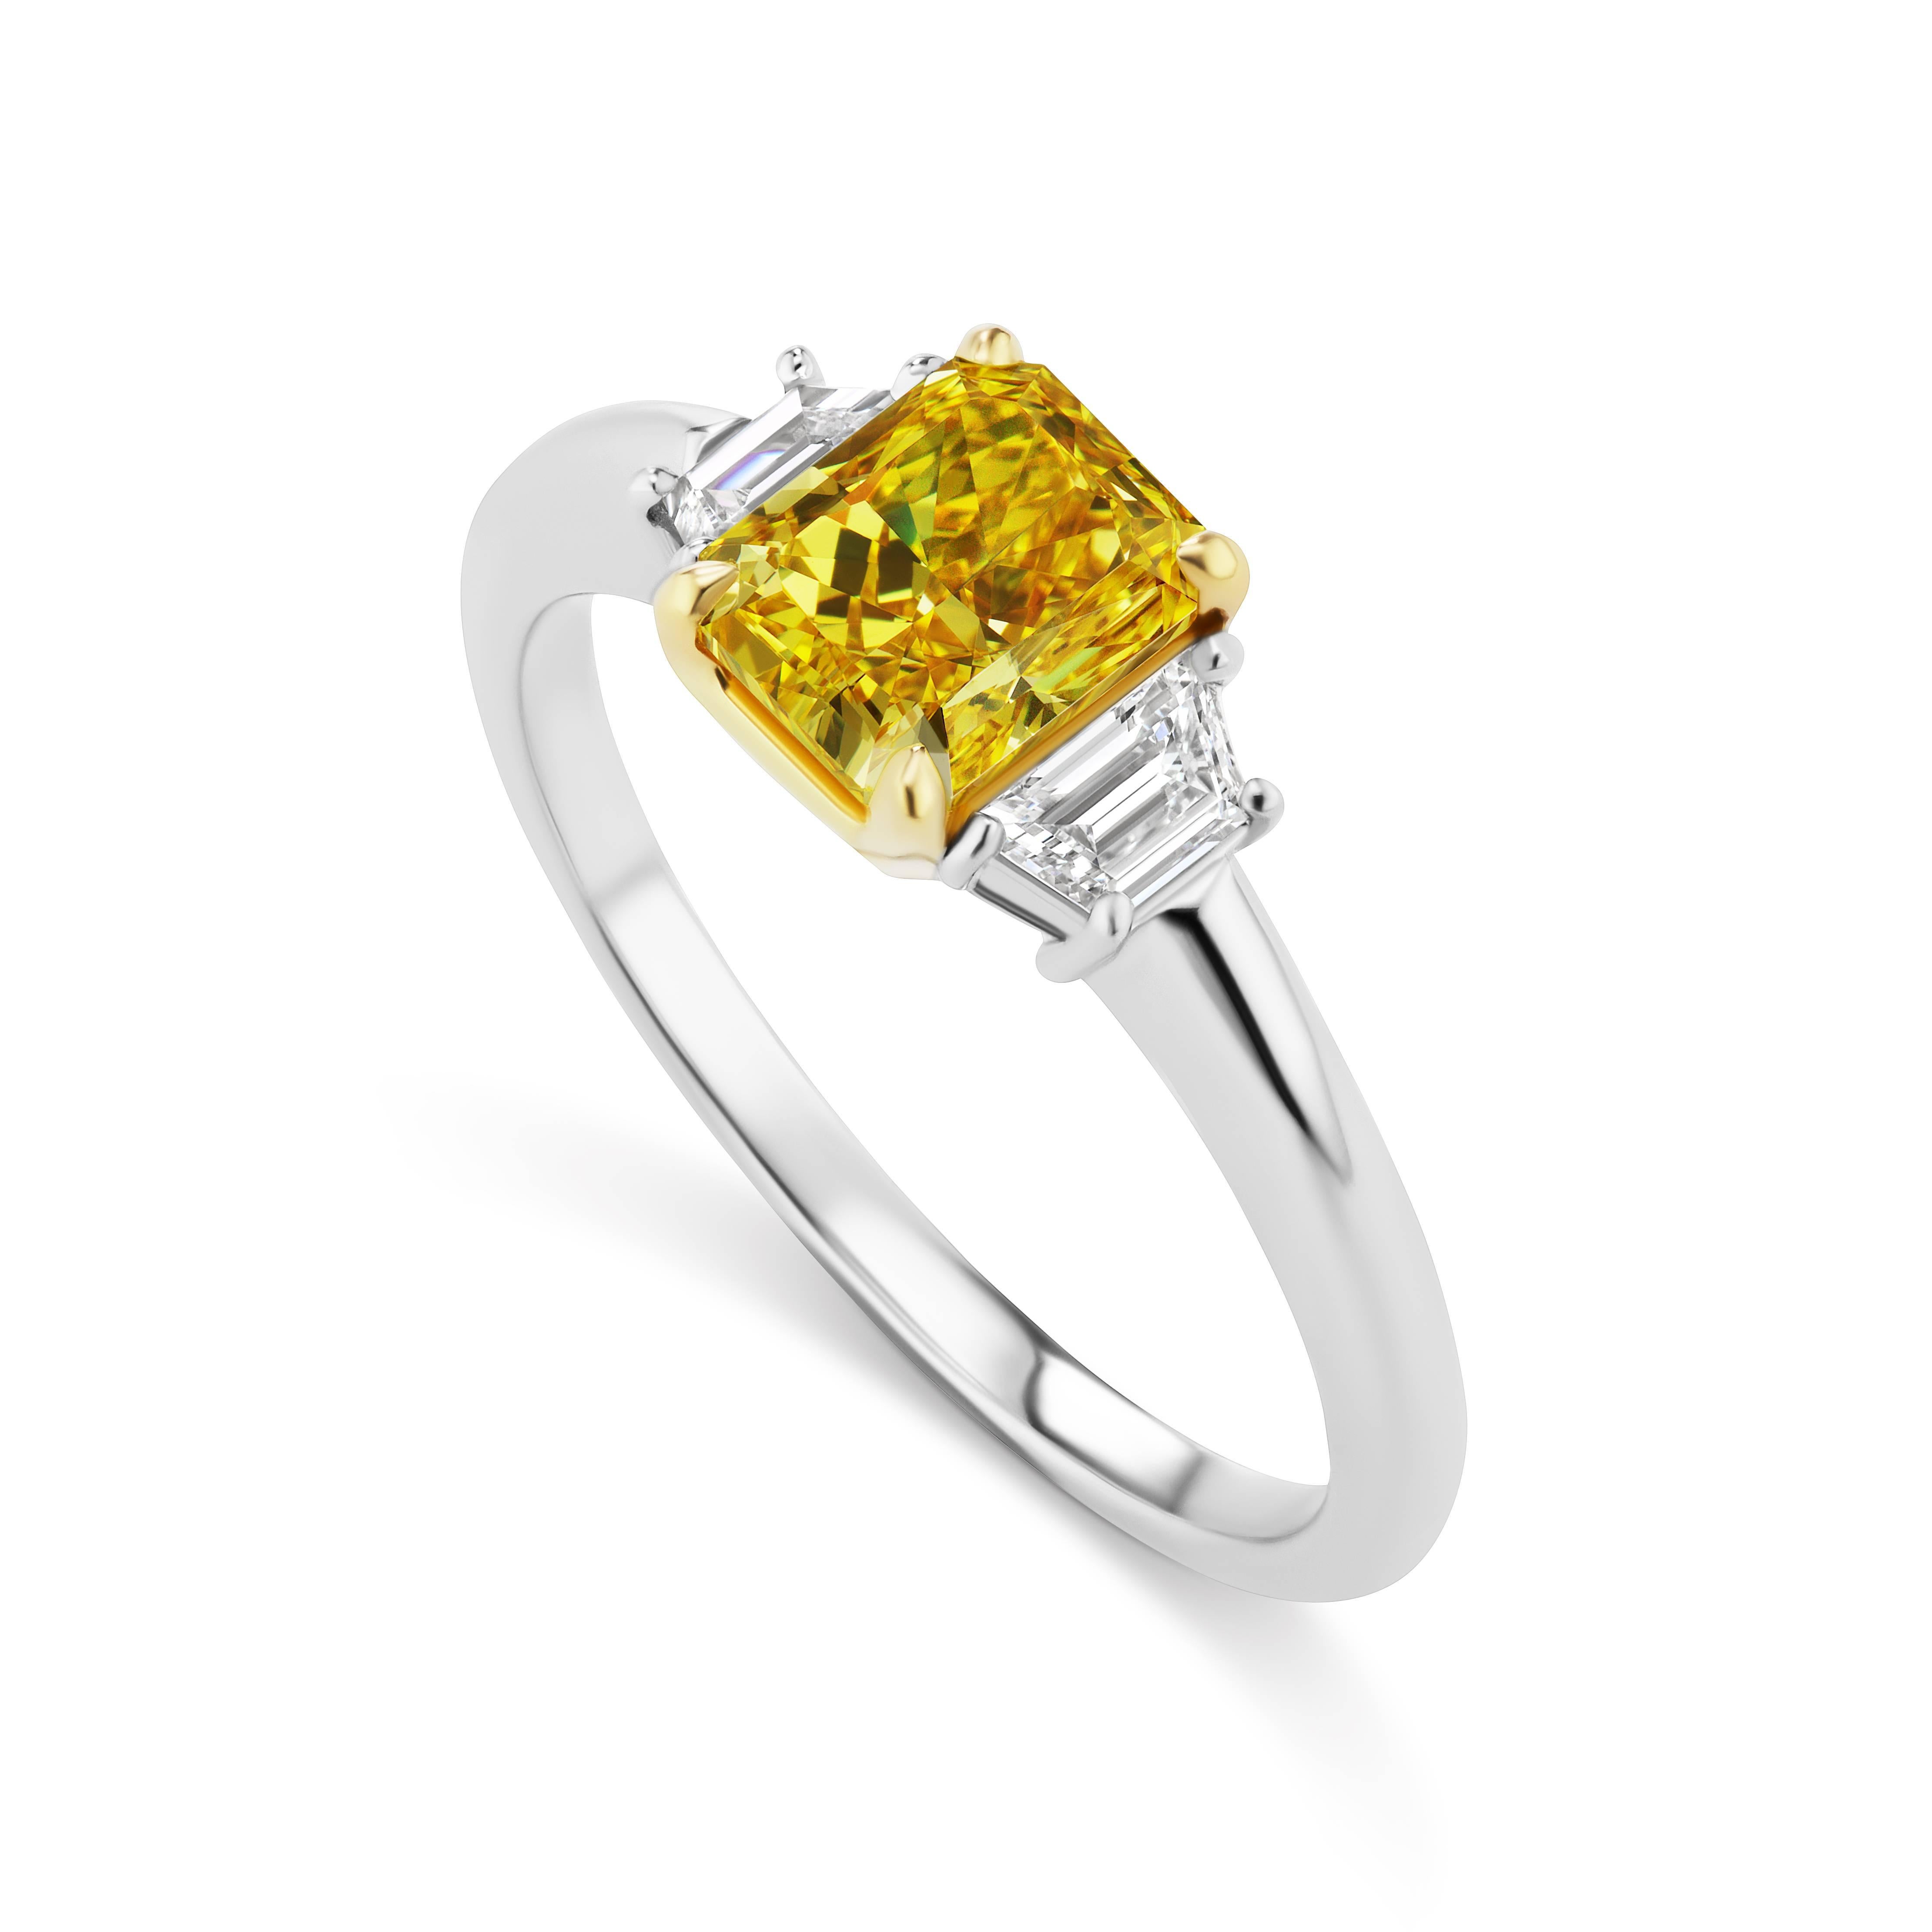 From the Collection of Scarselli, this 1.18 carat Fancy Vivid Yellow VS2  Radiant cut diamond is mounted with .25 total carats of side Trapezoid shape diamonds in Platinum and 18 karat Yellow Gold.  

The ring is sizeable.  This Scarselli Classic